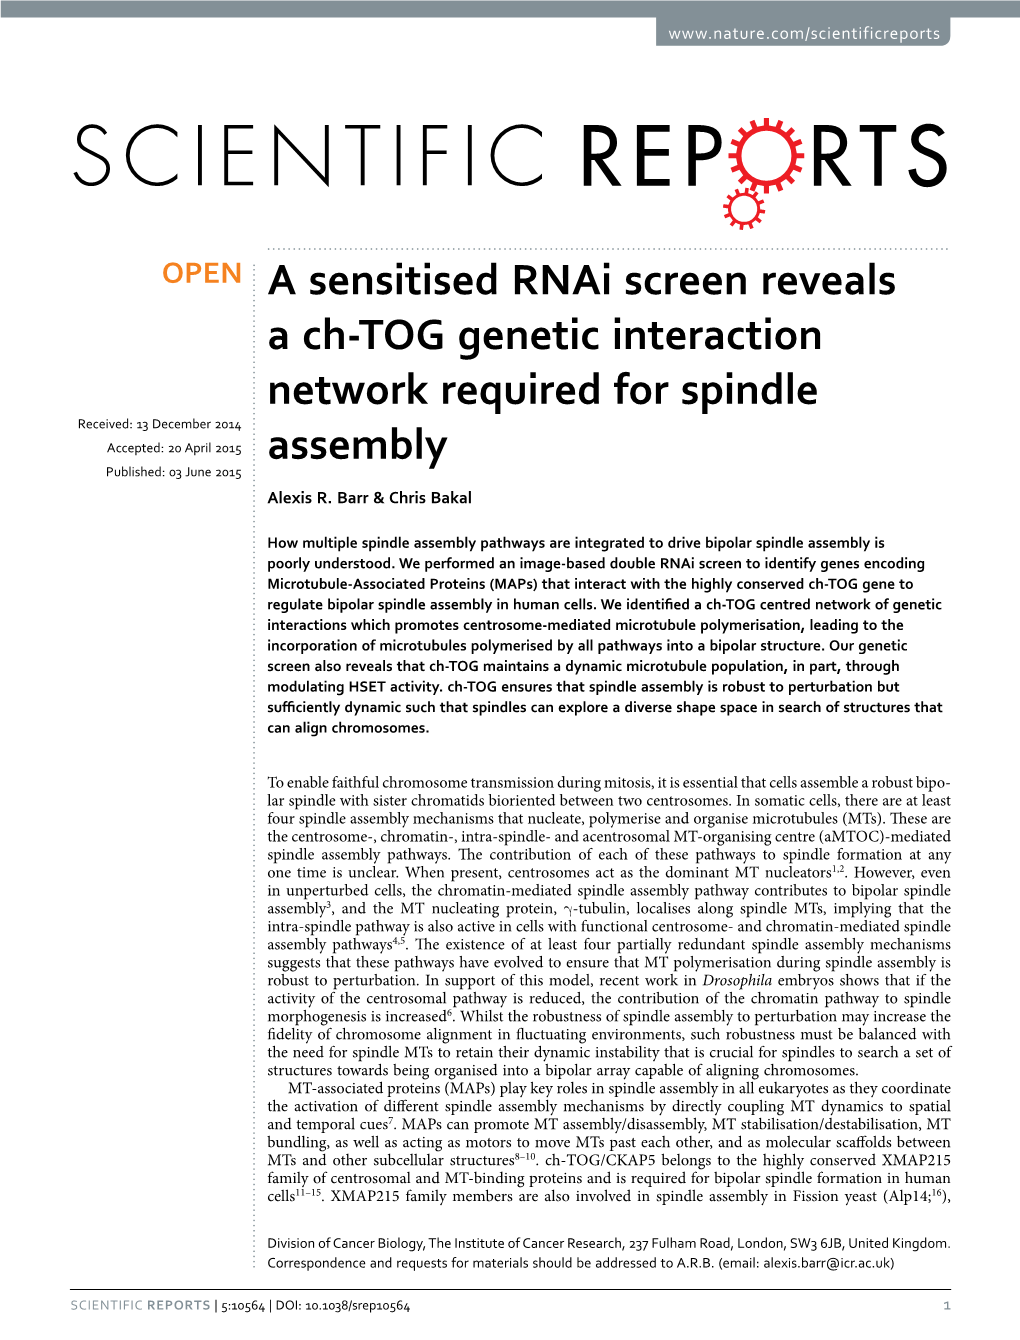 A Sensitised Rnai Screen Reveals a Ch-TOG Genetic Interaction Network